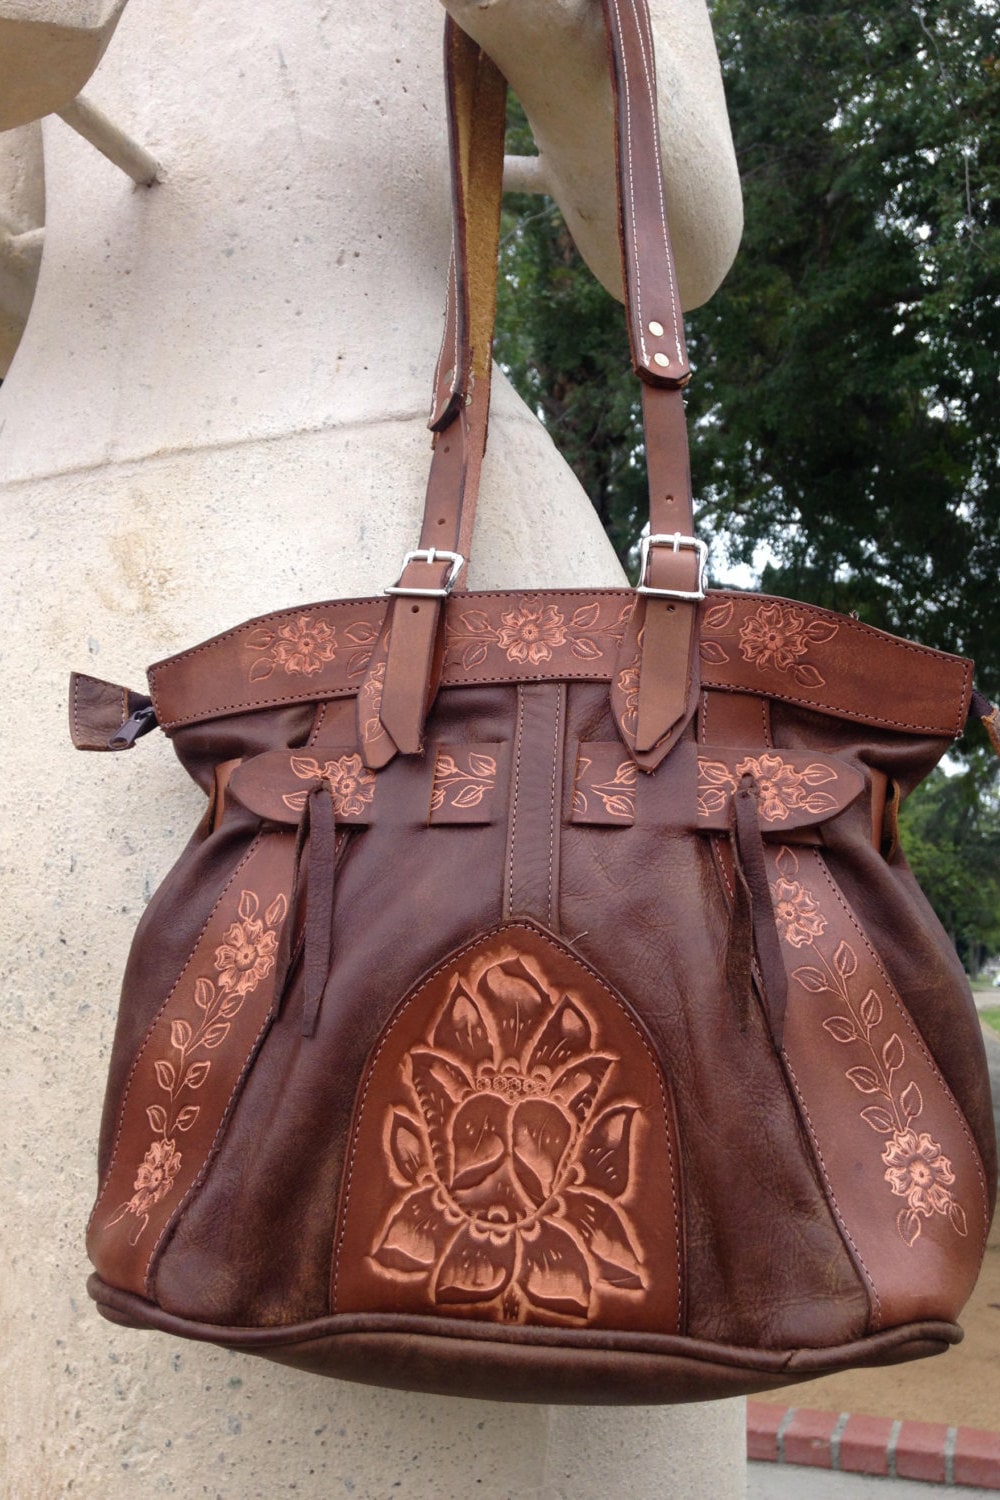 Authentic Mexican Hand-tooled Leather Purses by Don Adalberto